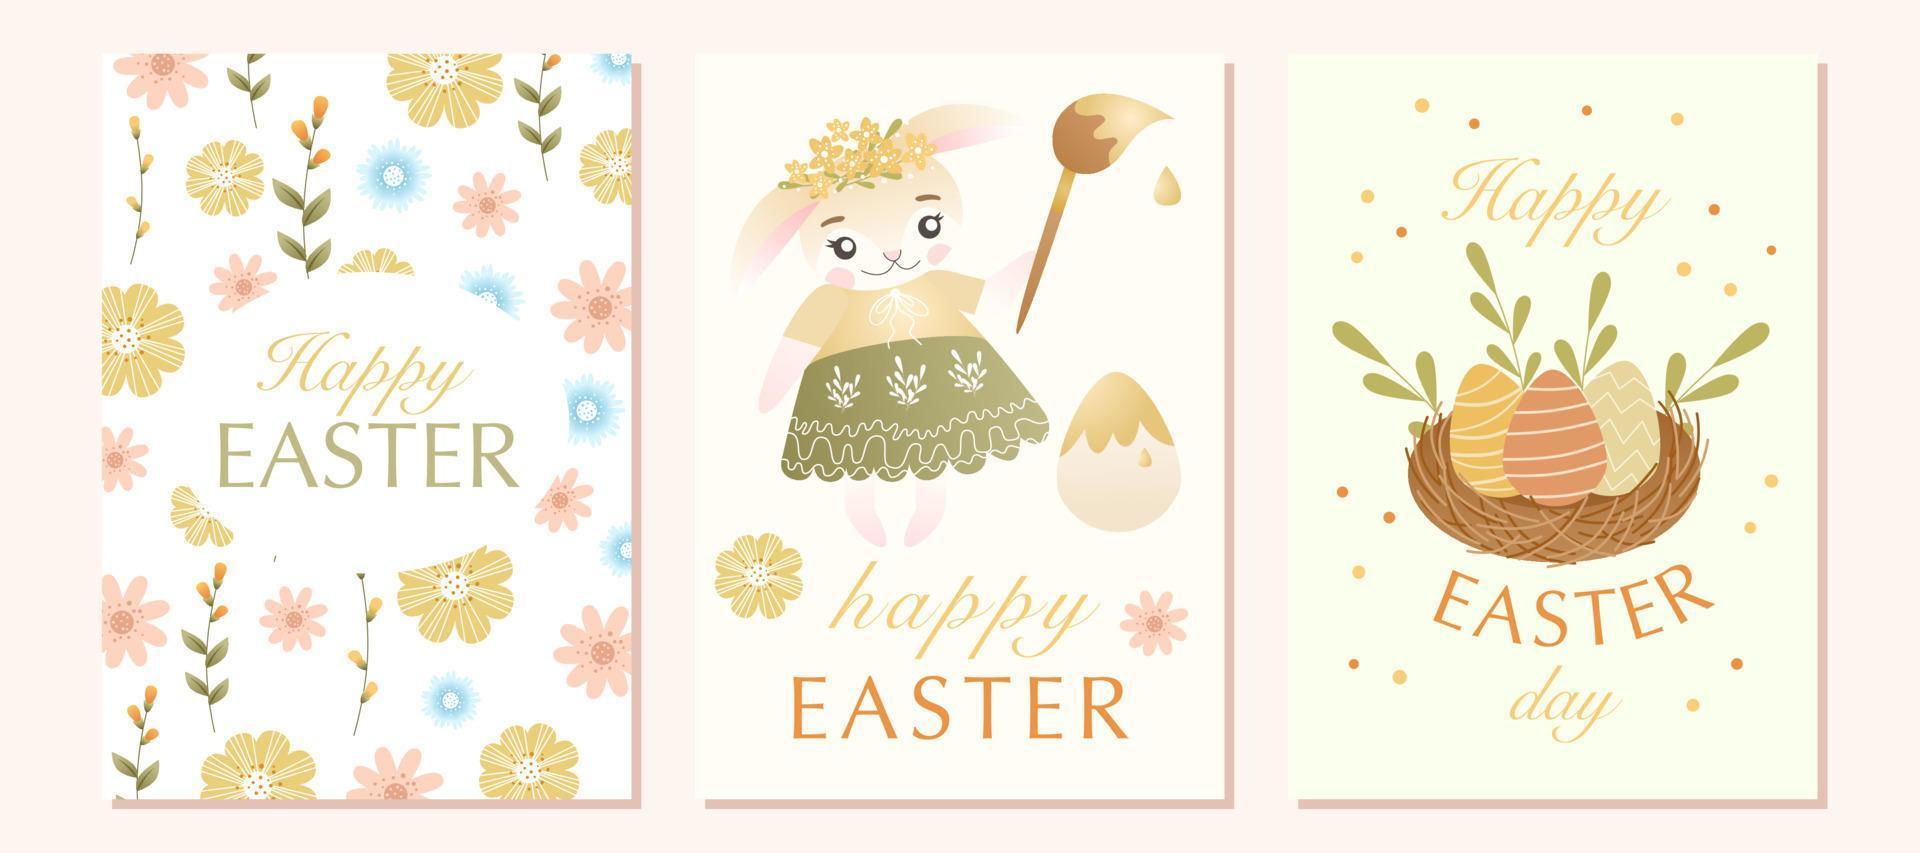 Easter greeting card set with cute bunny character, colored egg, spring flowers, green leaves. Good for Spring and Easter greeting cards, posters, children's design and banners. Vector illustration.